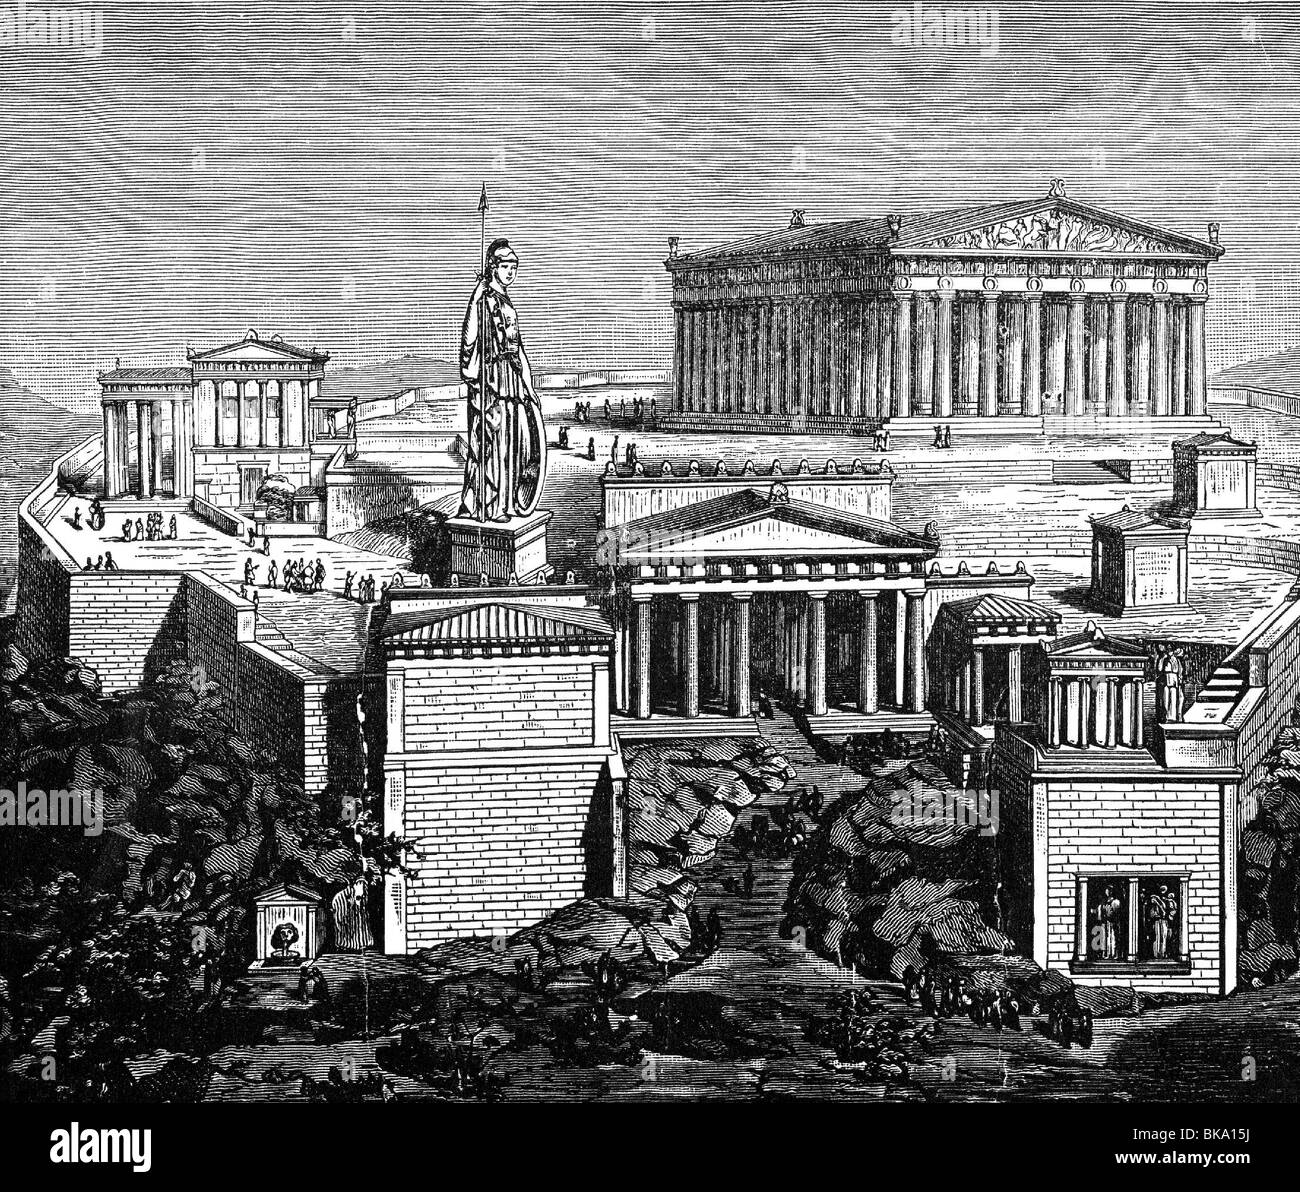 Sketch Of Ruins Of Acropolis, Athens Stock Photo, Picture And Royalty Free  Image. Image 130443742.